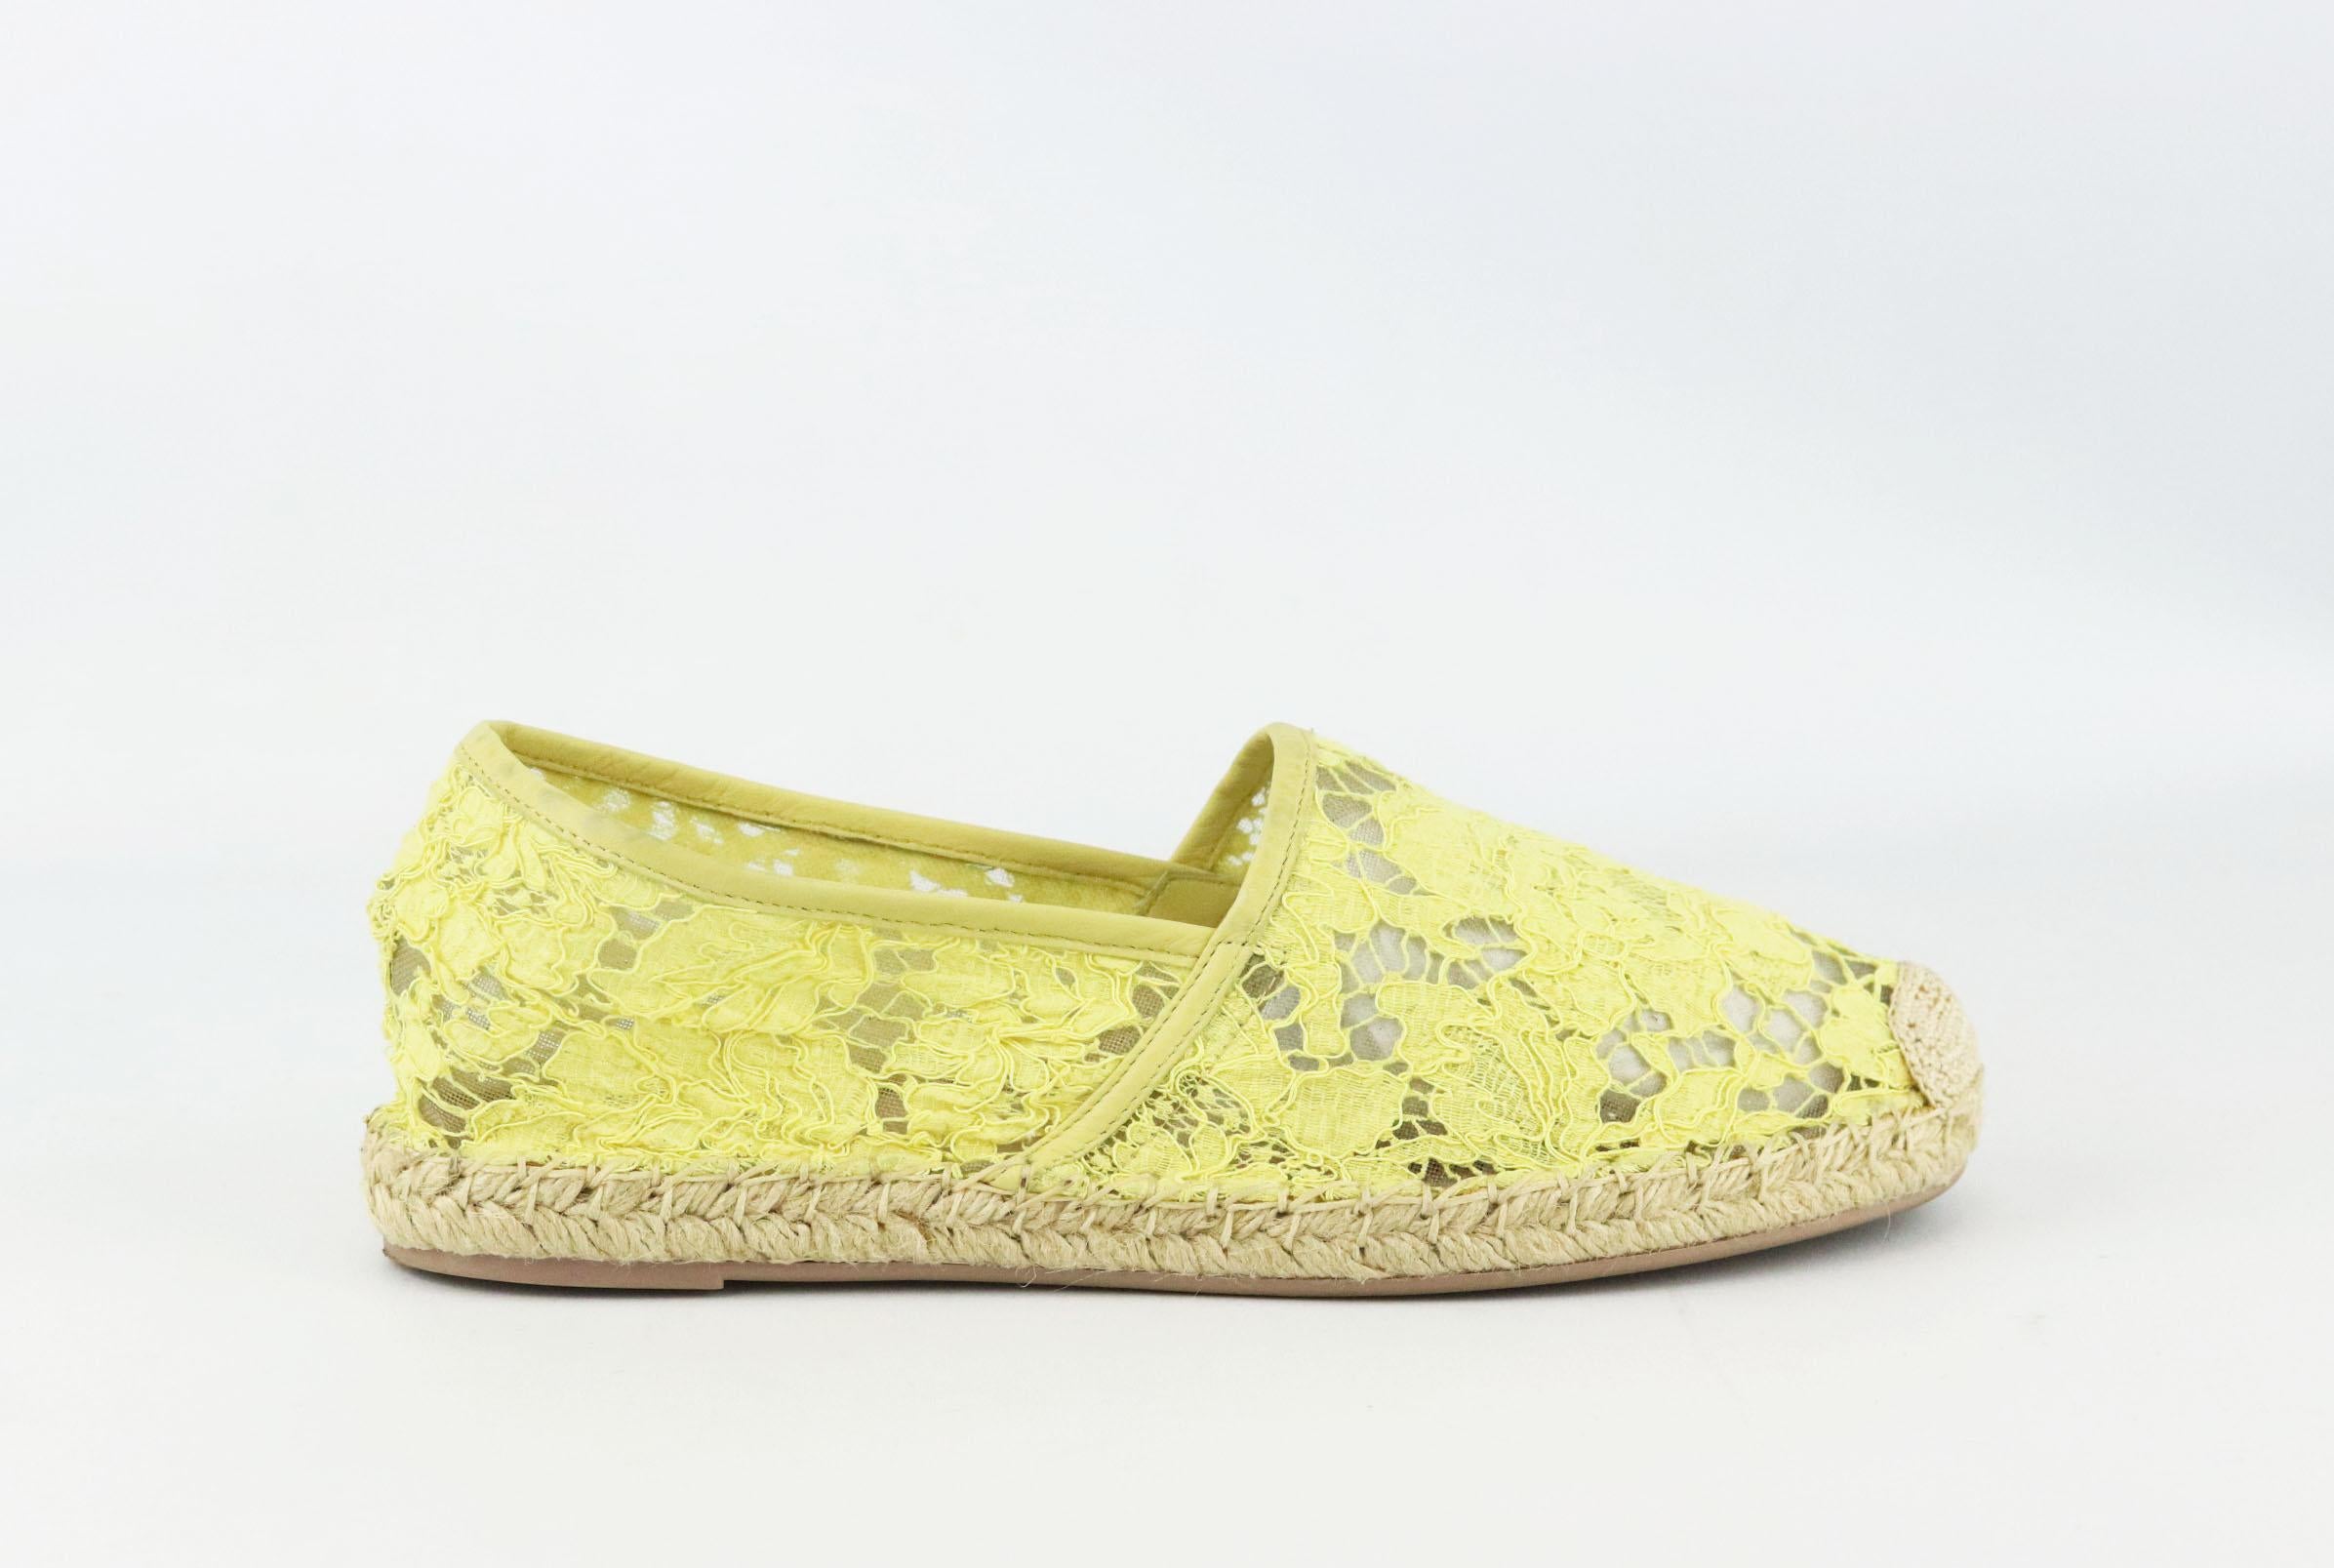 Valentino's hand-stitched lace and mesh espadrilles are among our favourite creations from the Valentino design duo, they are finished with a soft leather trim and jute soles.
Soles measures approximately 10 mm/ 0.5 inches.
Yellow sheer lace-covered